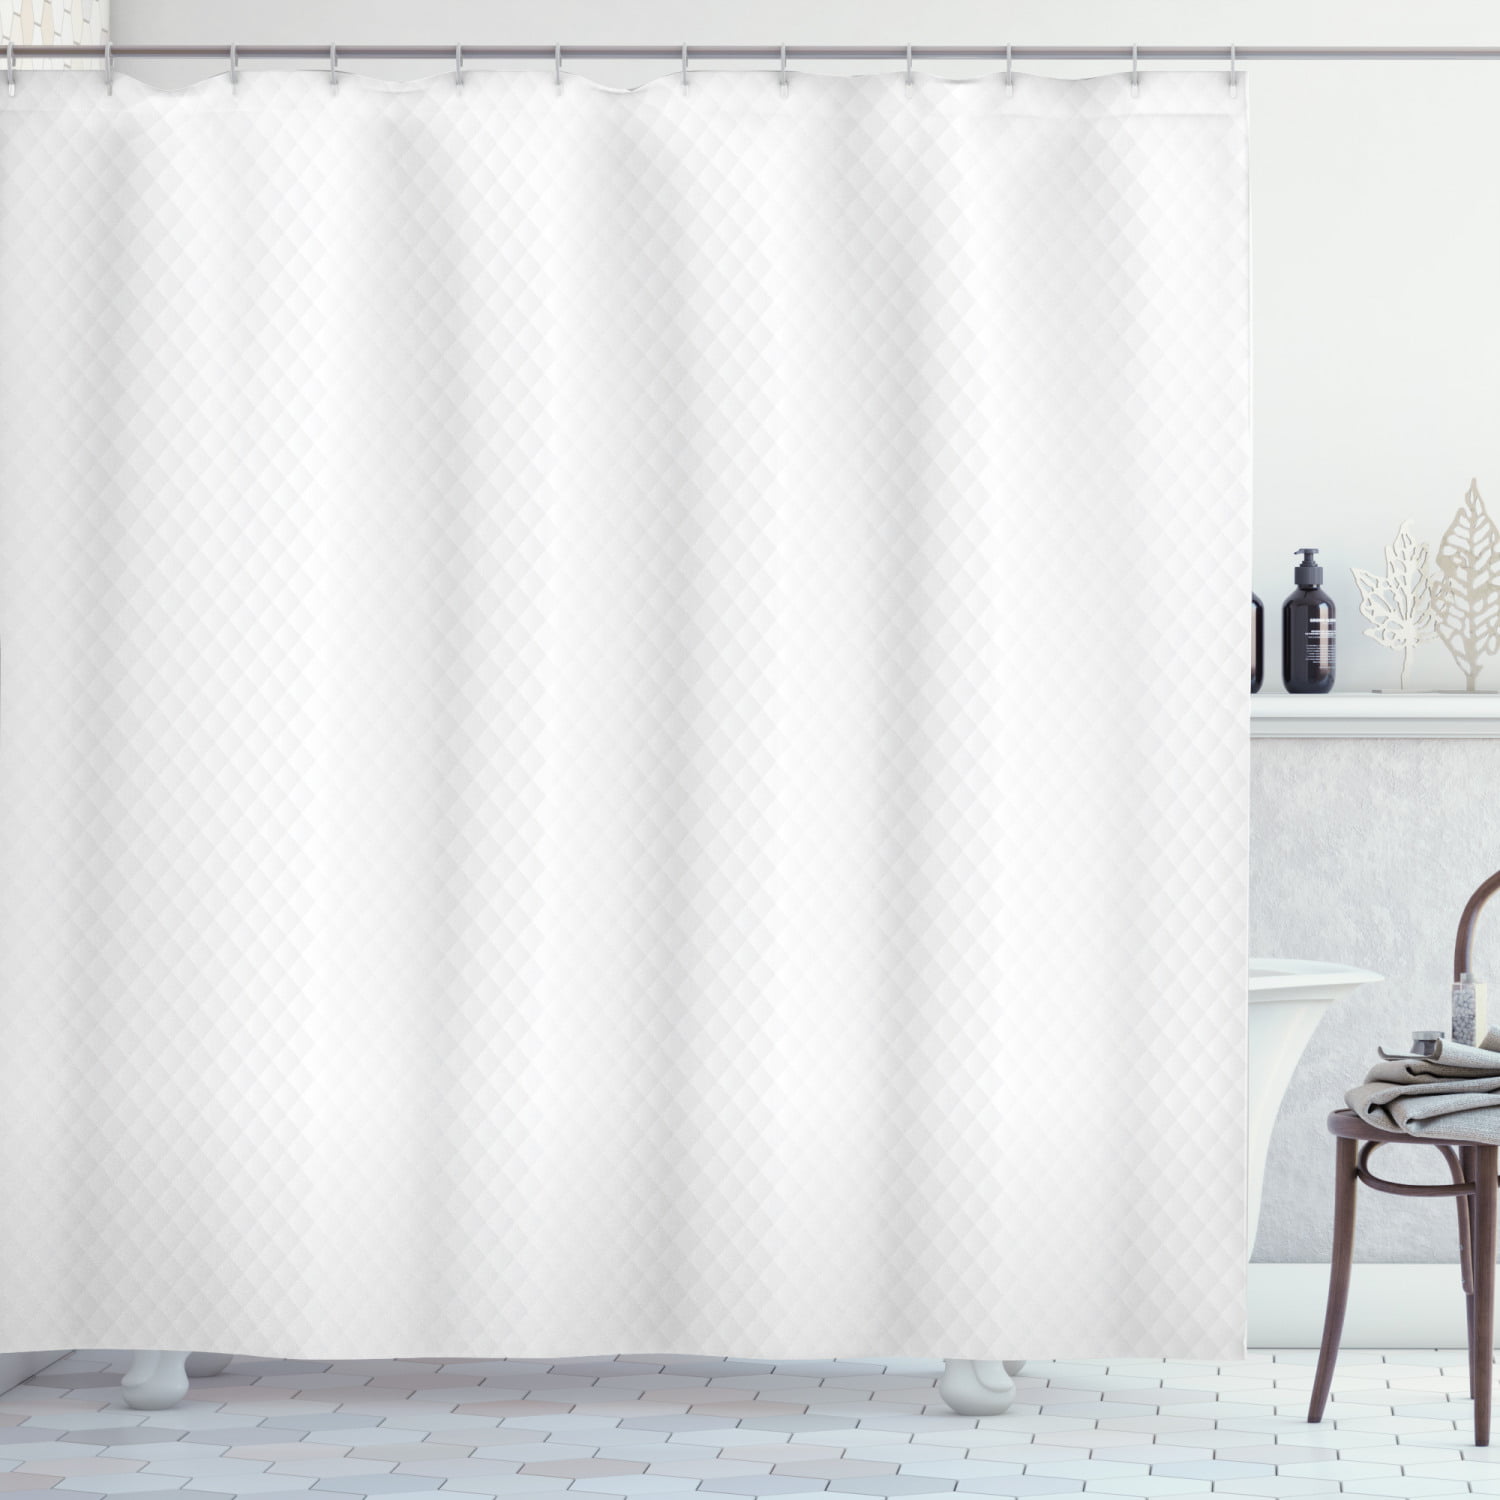 Details about   Shower 3D Curtain With Rings Hooks New Modern Waterproof PEVA Bathroom Curtain 